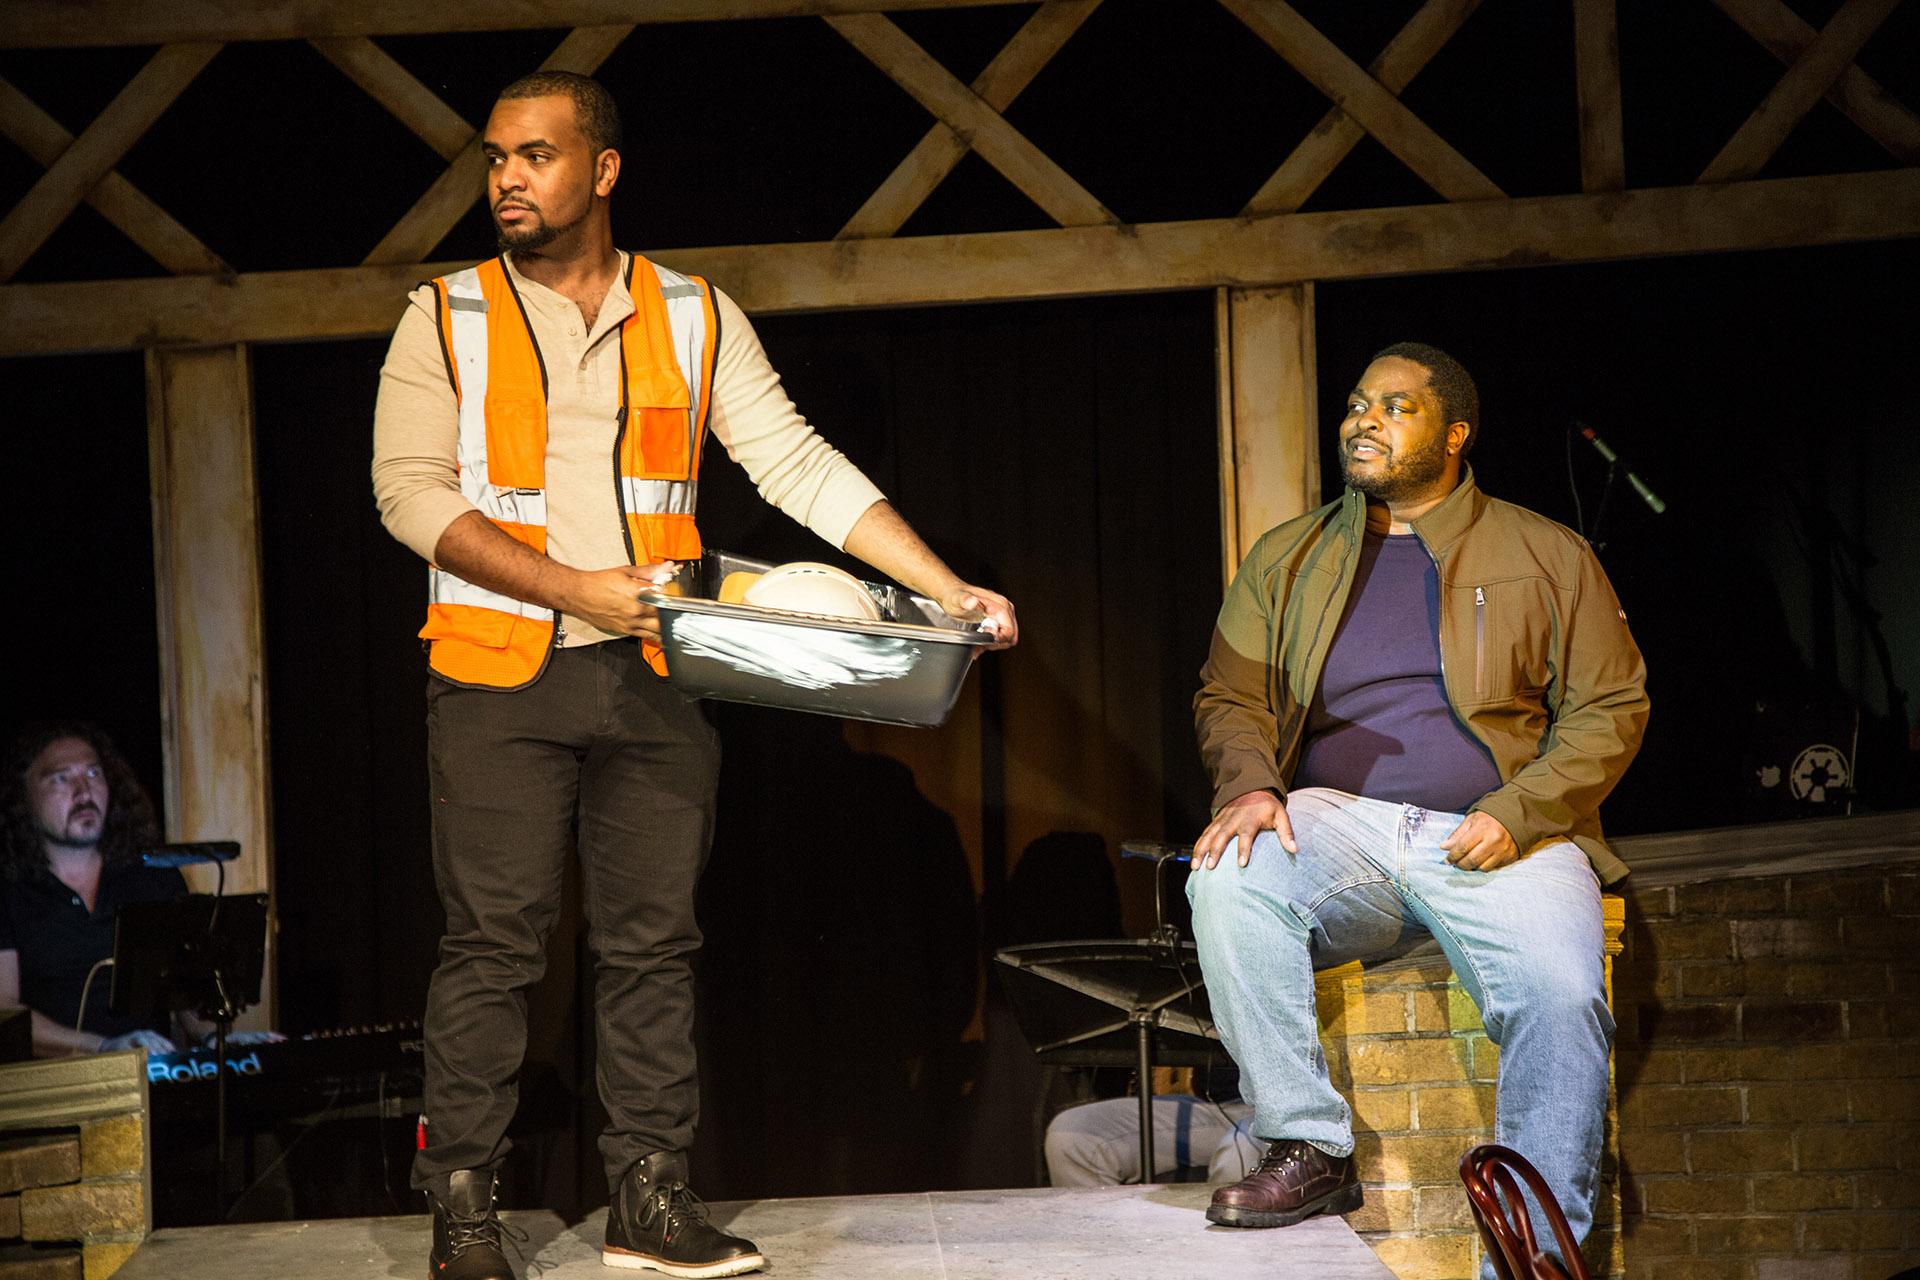 Stephen Blu Allen (left) and Jared David Michael Grant in “Working.” (Photo by Austin Oie Photography)